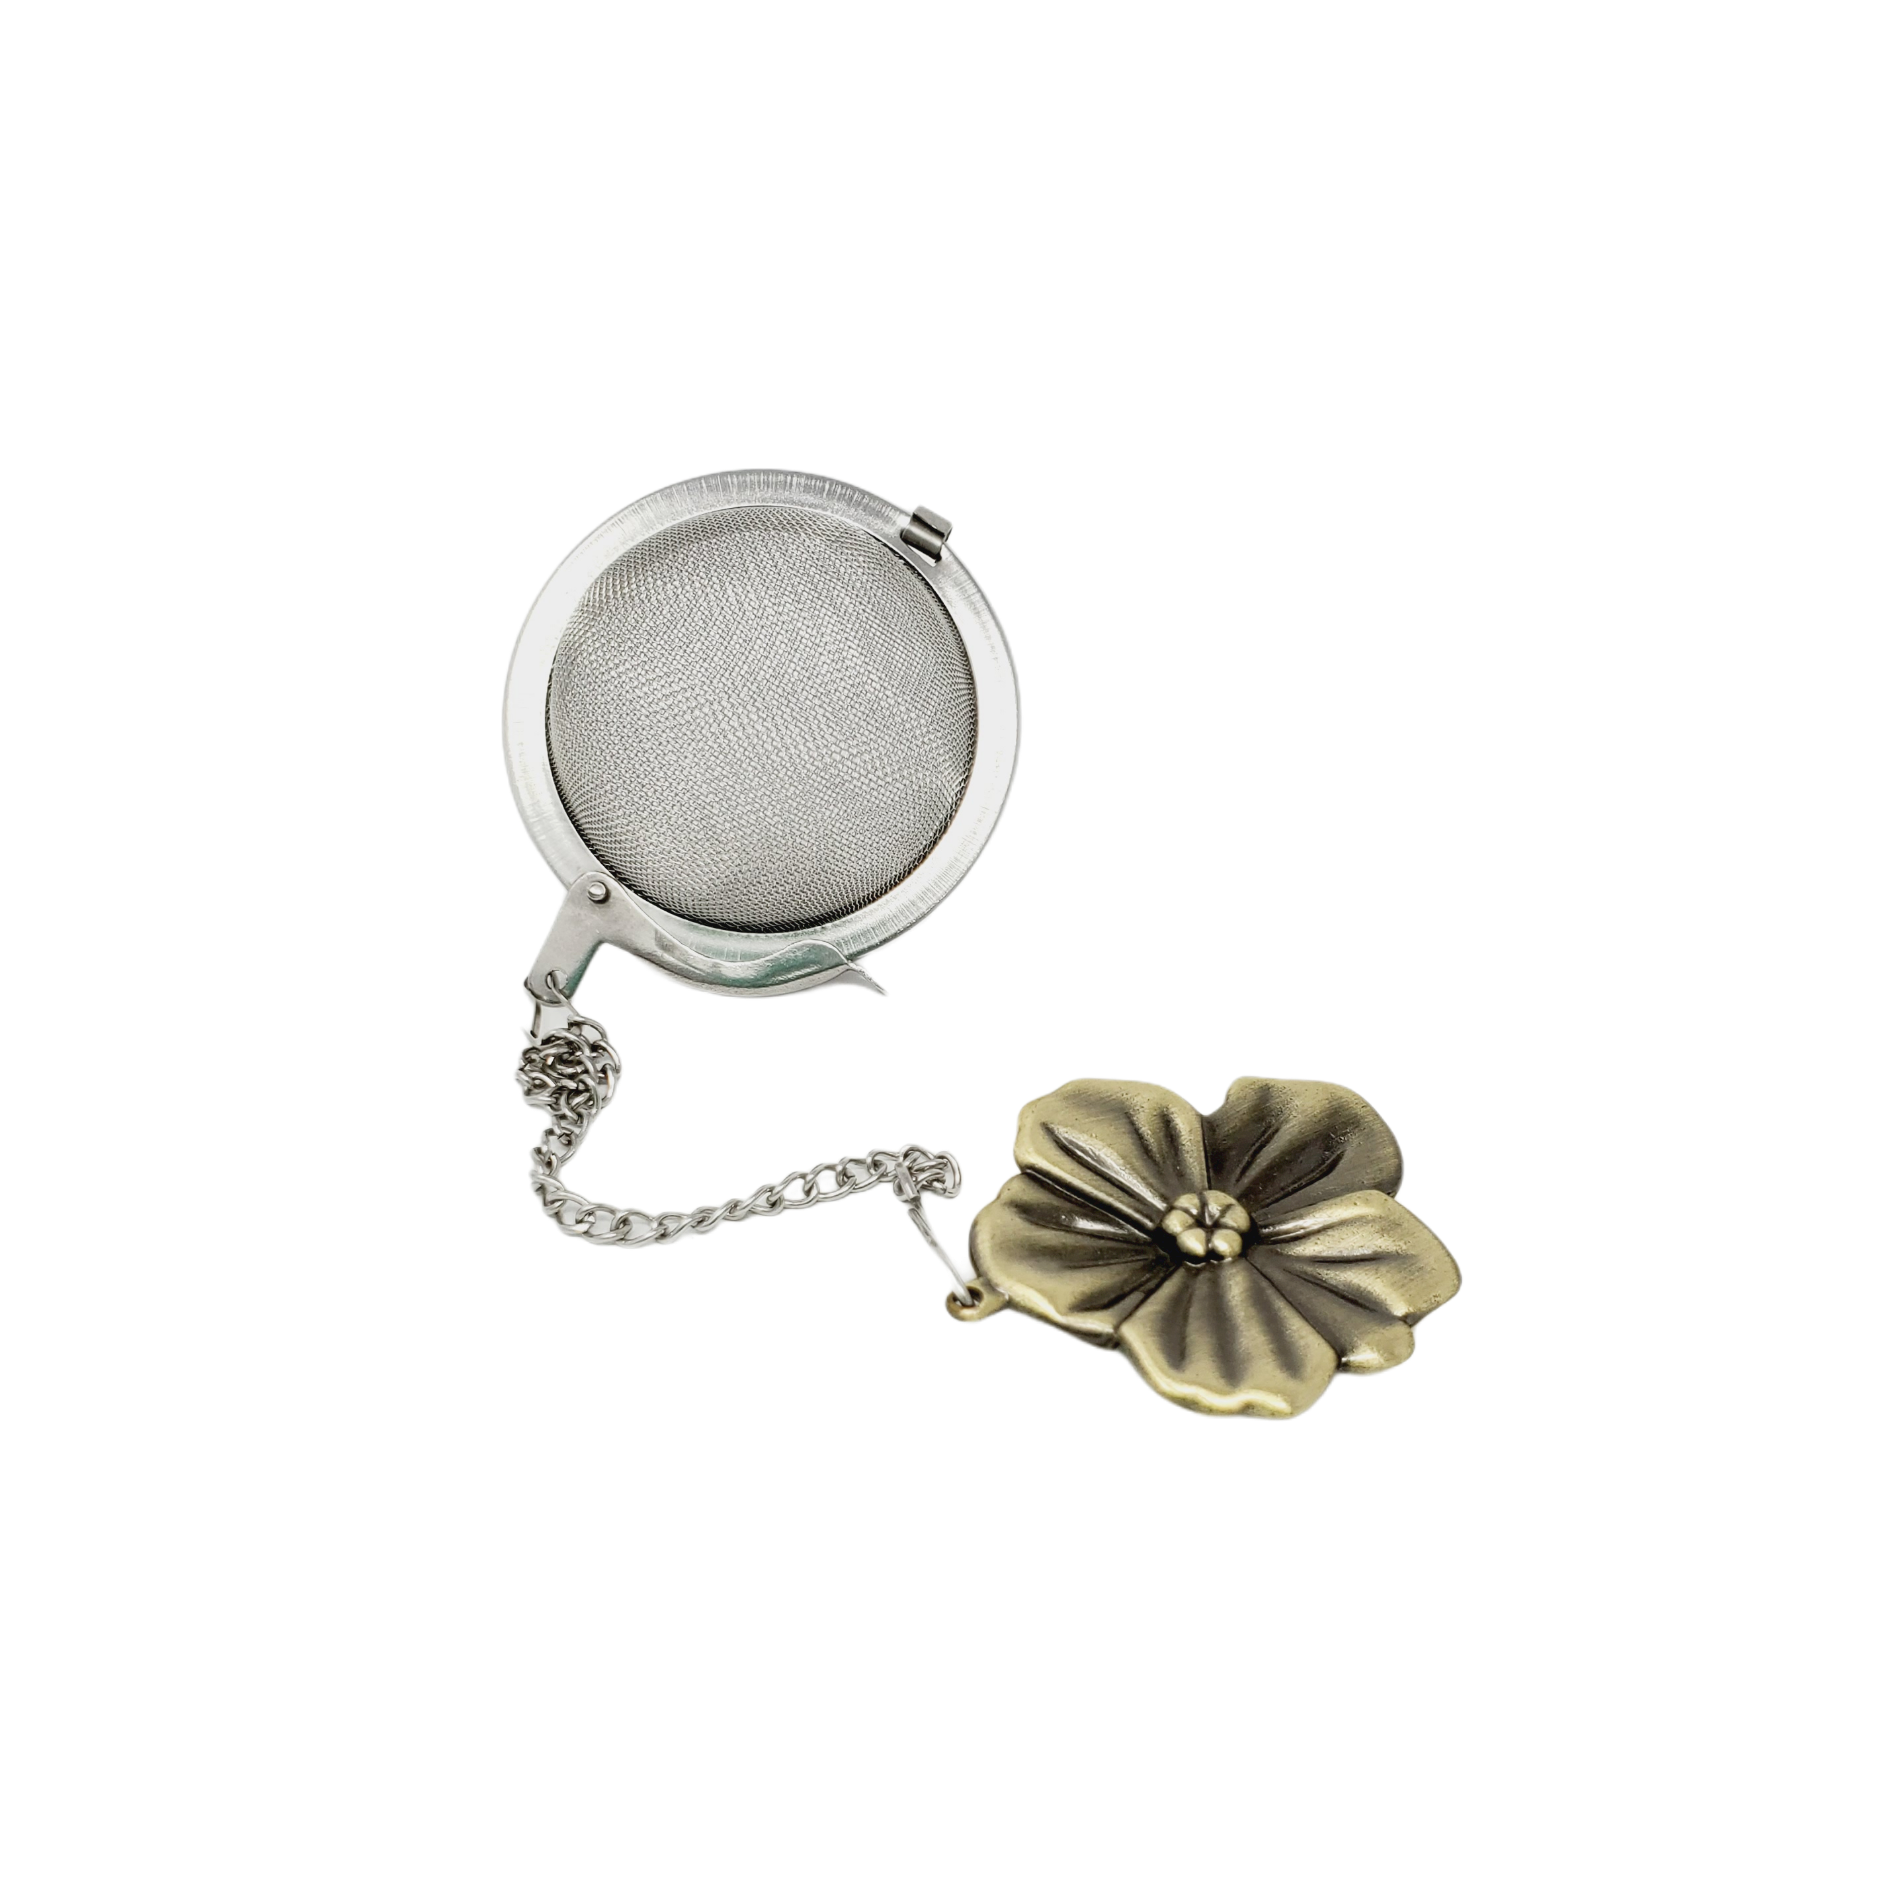 Mesh Ball Tea Infuser with Flower Charm